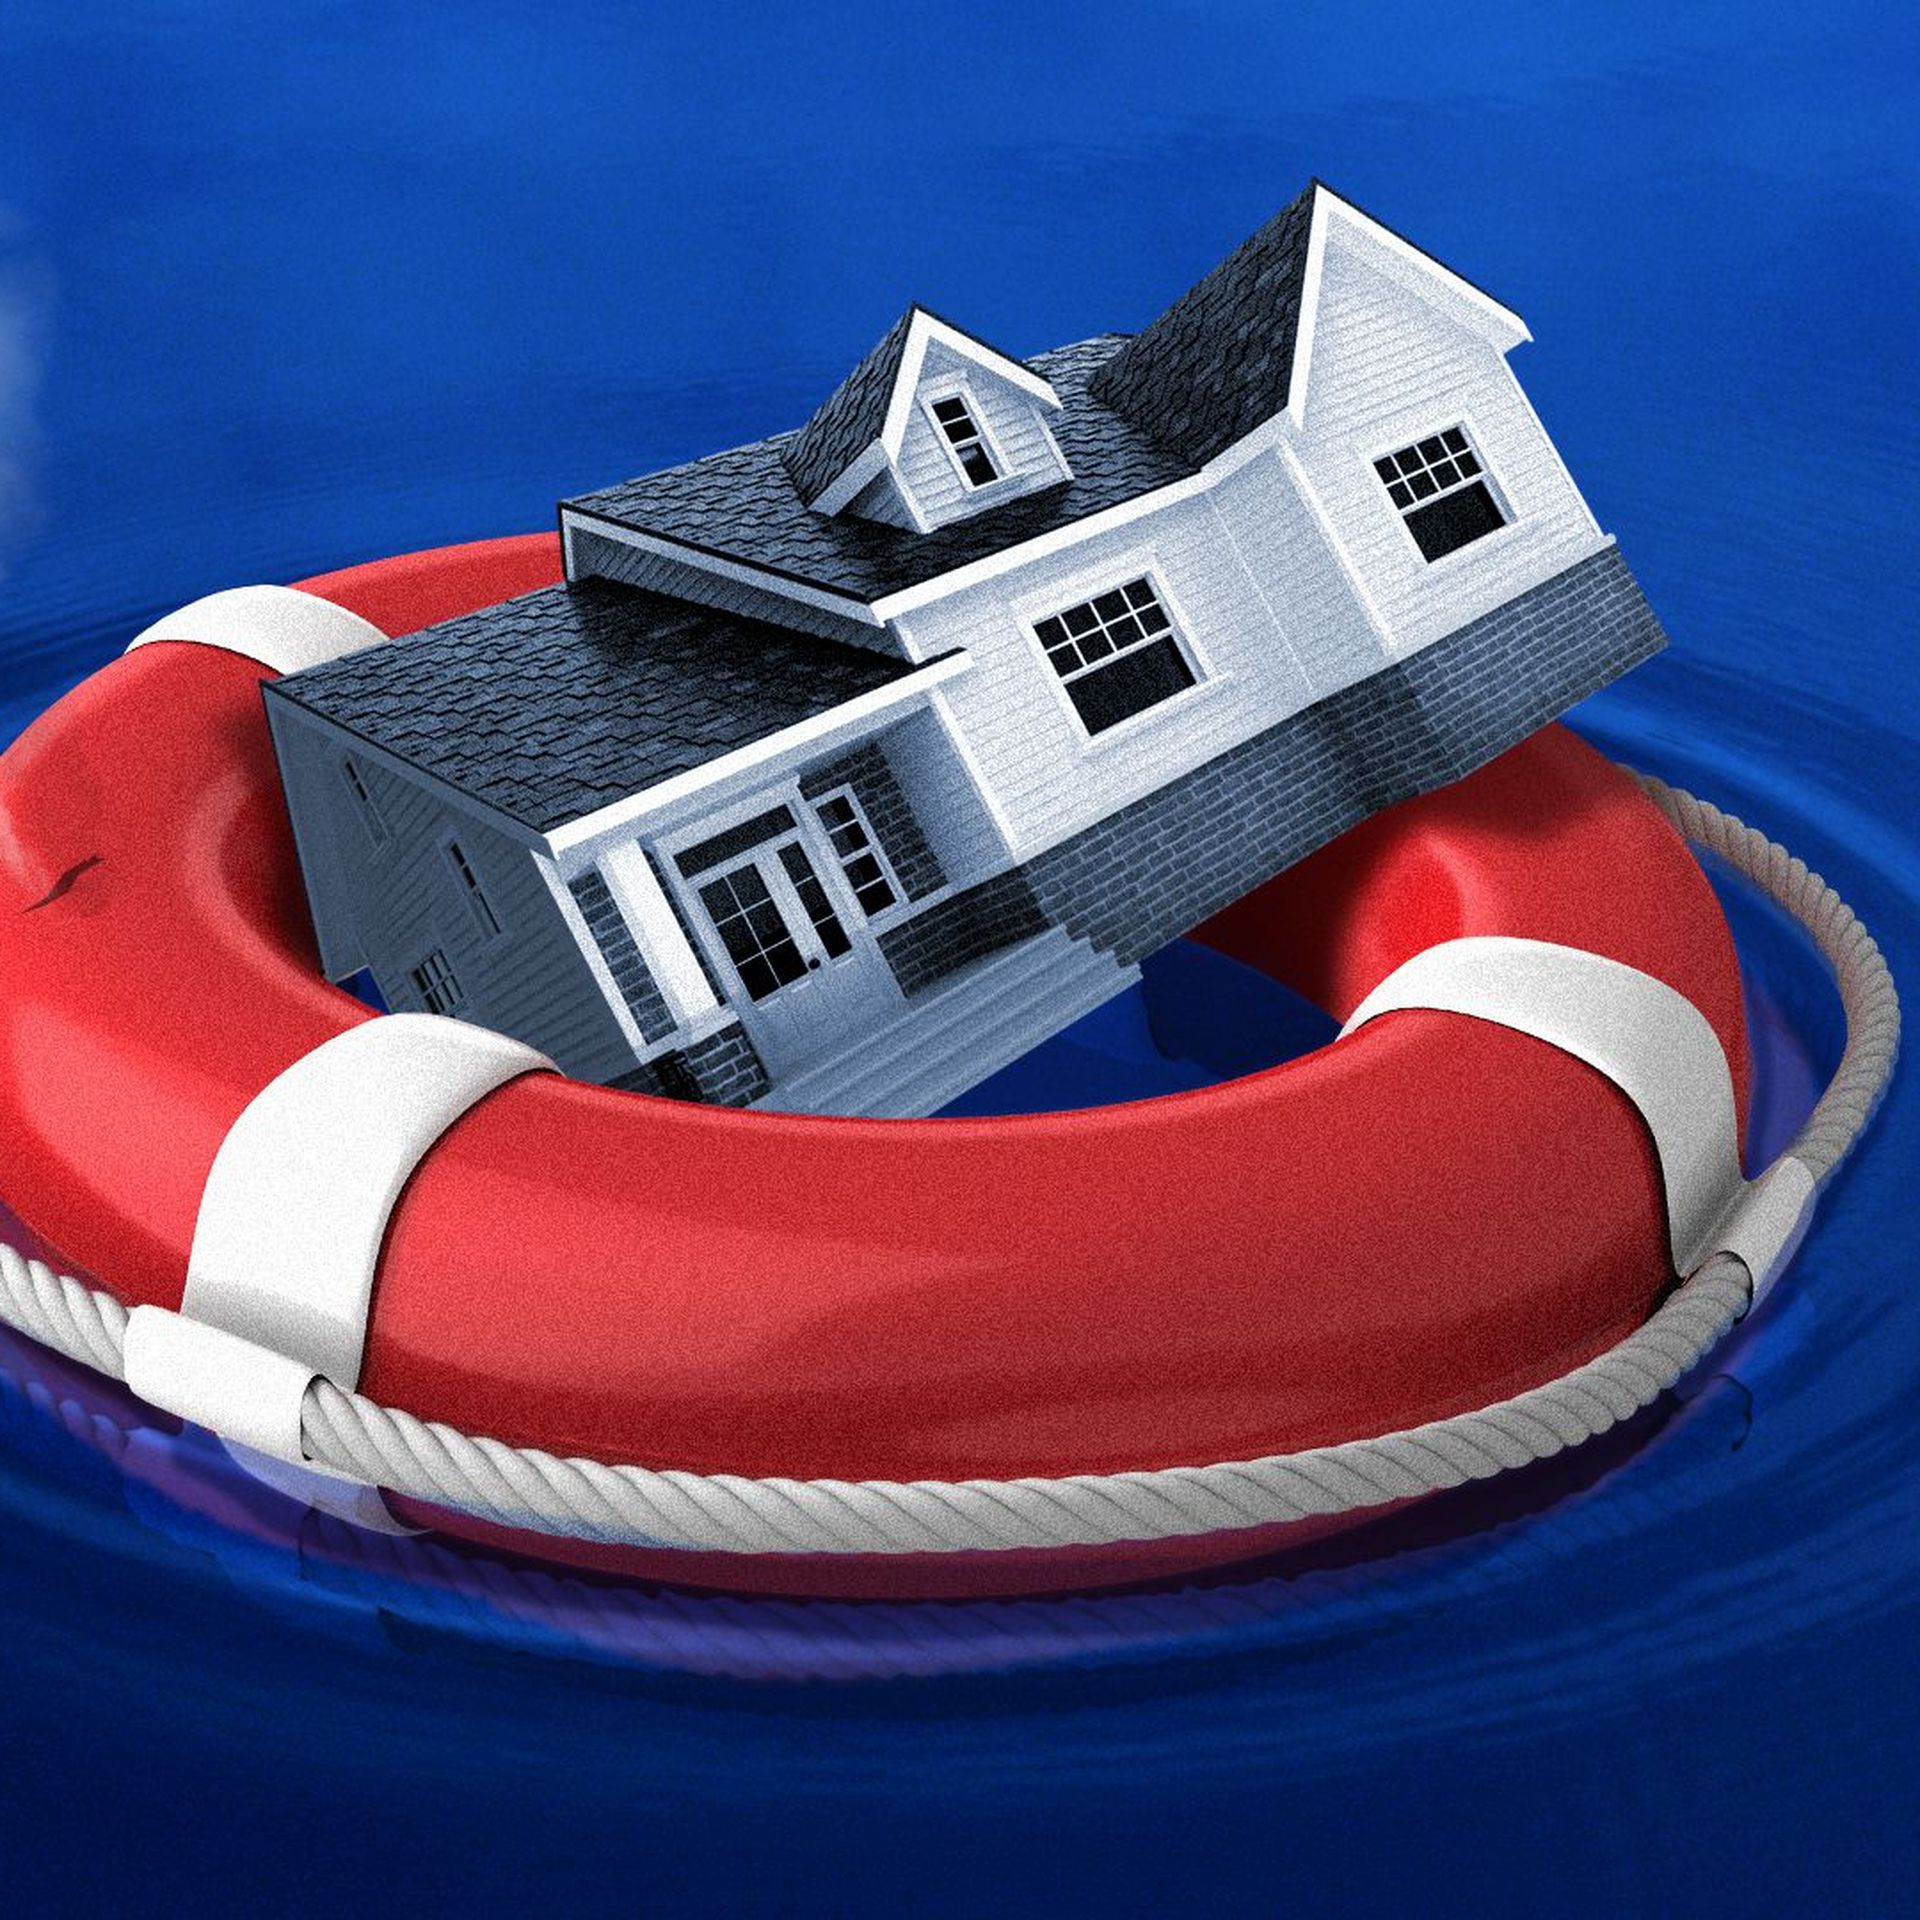 Illustration of a house in a deflating life preserver floating in water